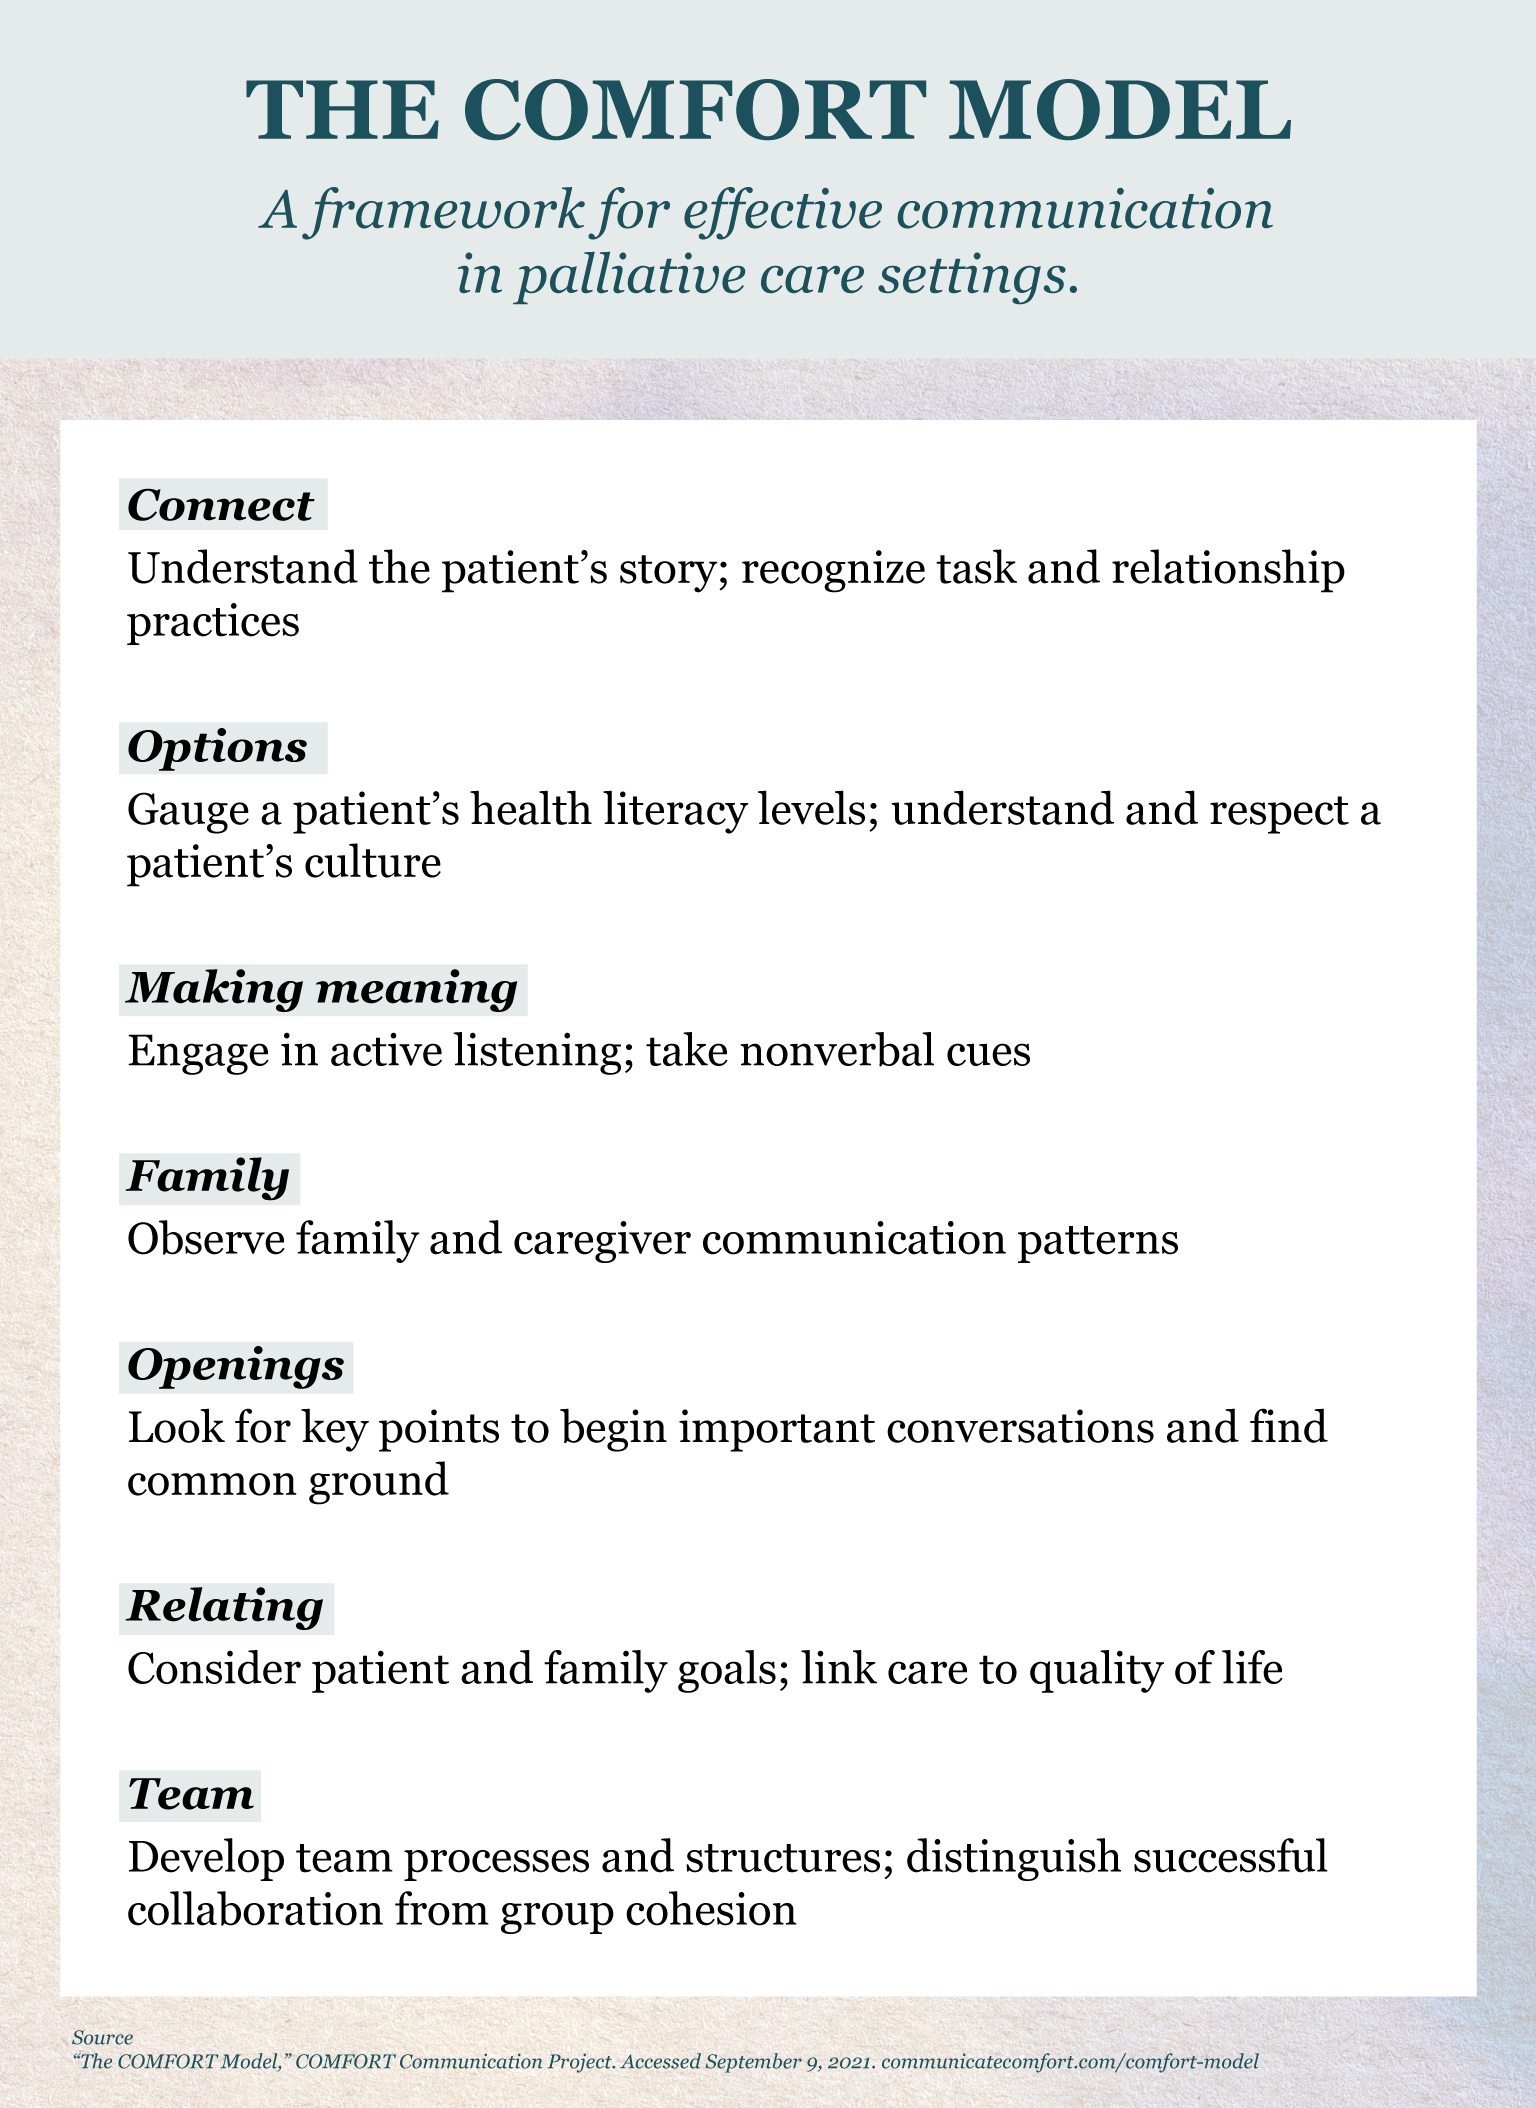 COMFORT is an acronym for seven principles that assist in palliative care communication. Health care providers can seek online training through the COMFORT Communication Project to develop stronger communication habits in these areas.